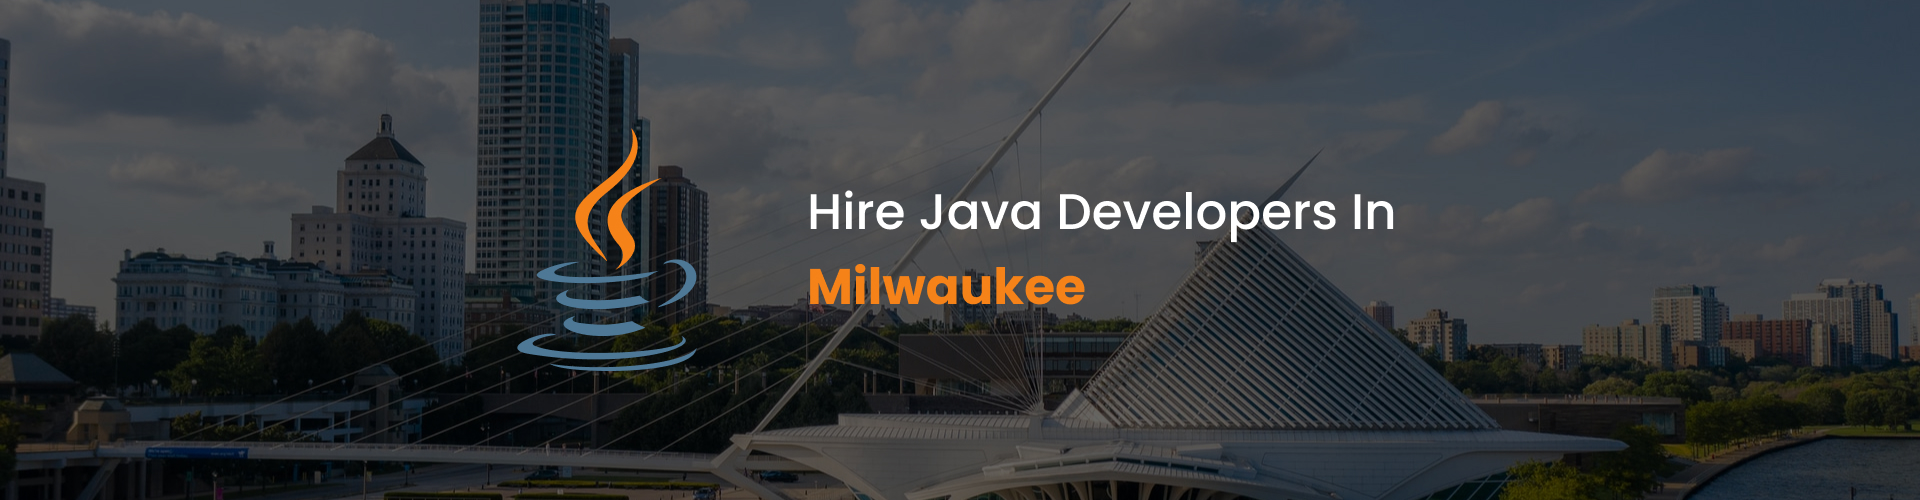 hire java developers in milwaukee